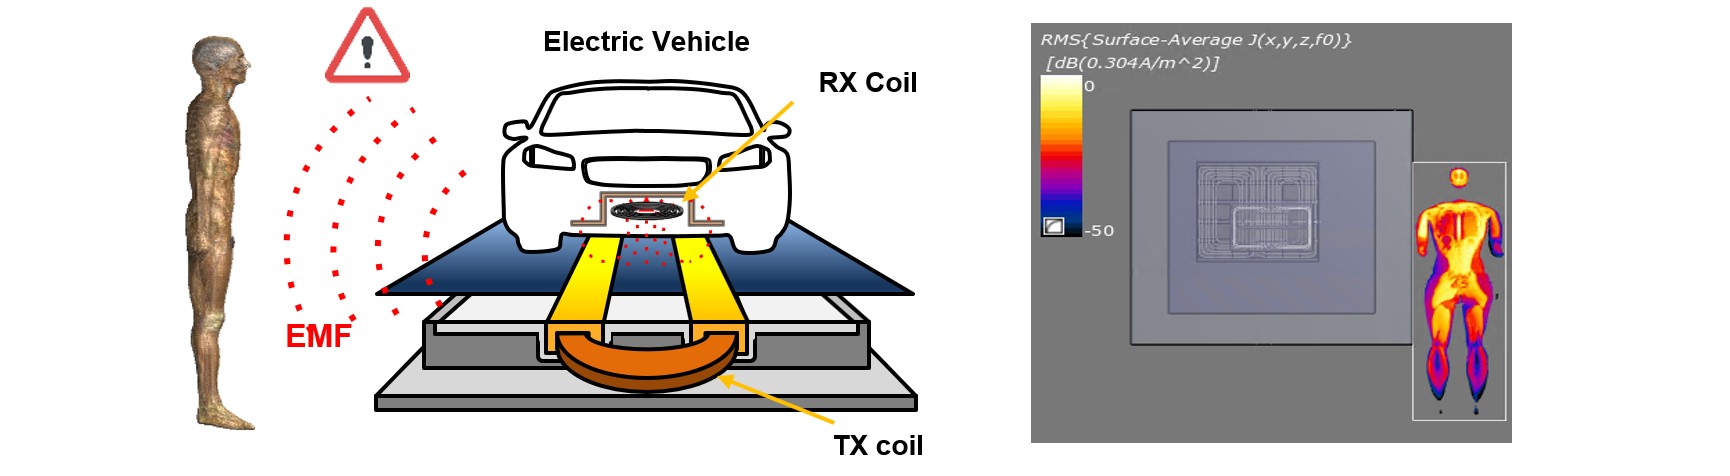 EMF Evaluation Method from EV Wireless Charging System 이미지